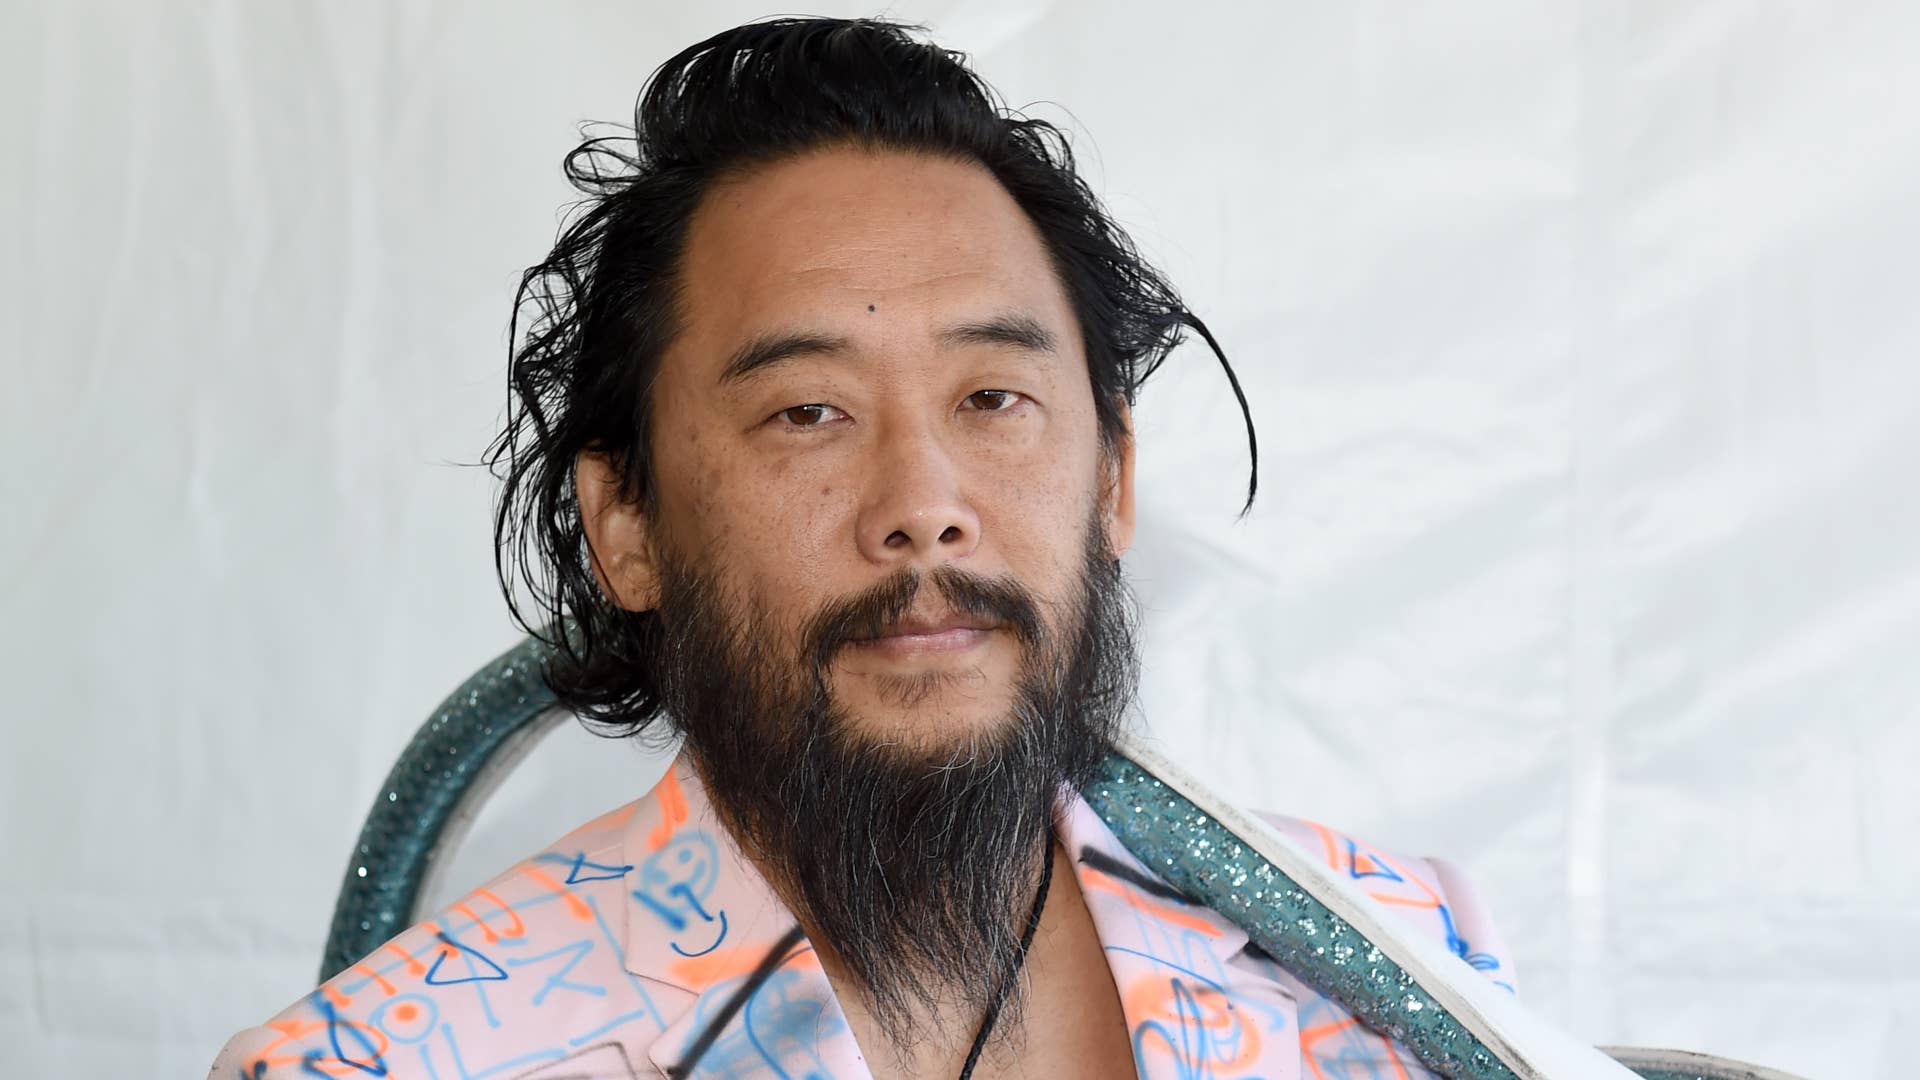 David Choe is seen at an awards show